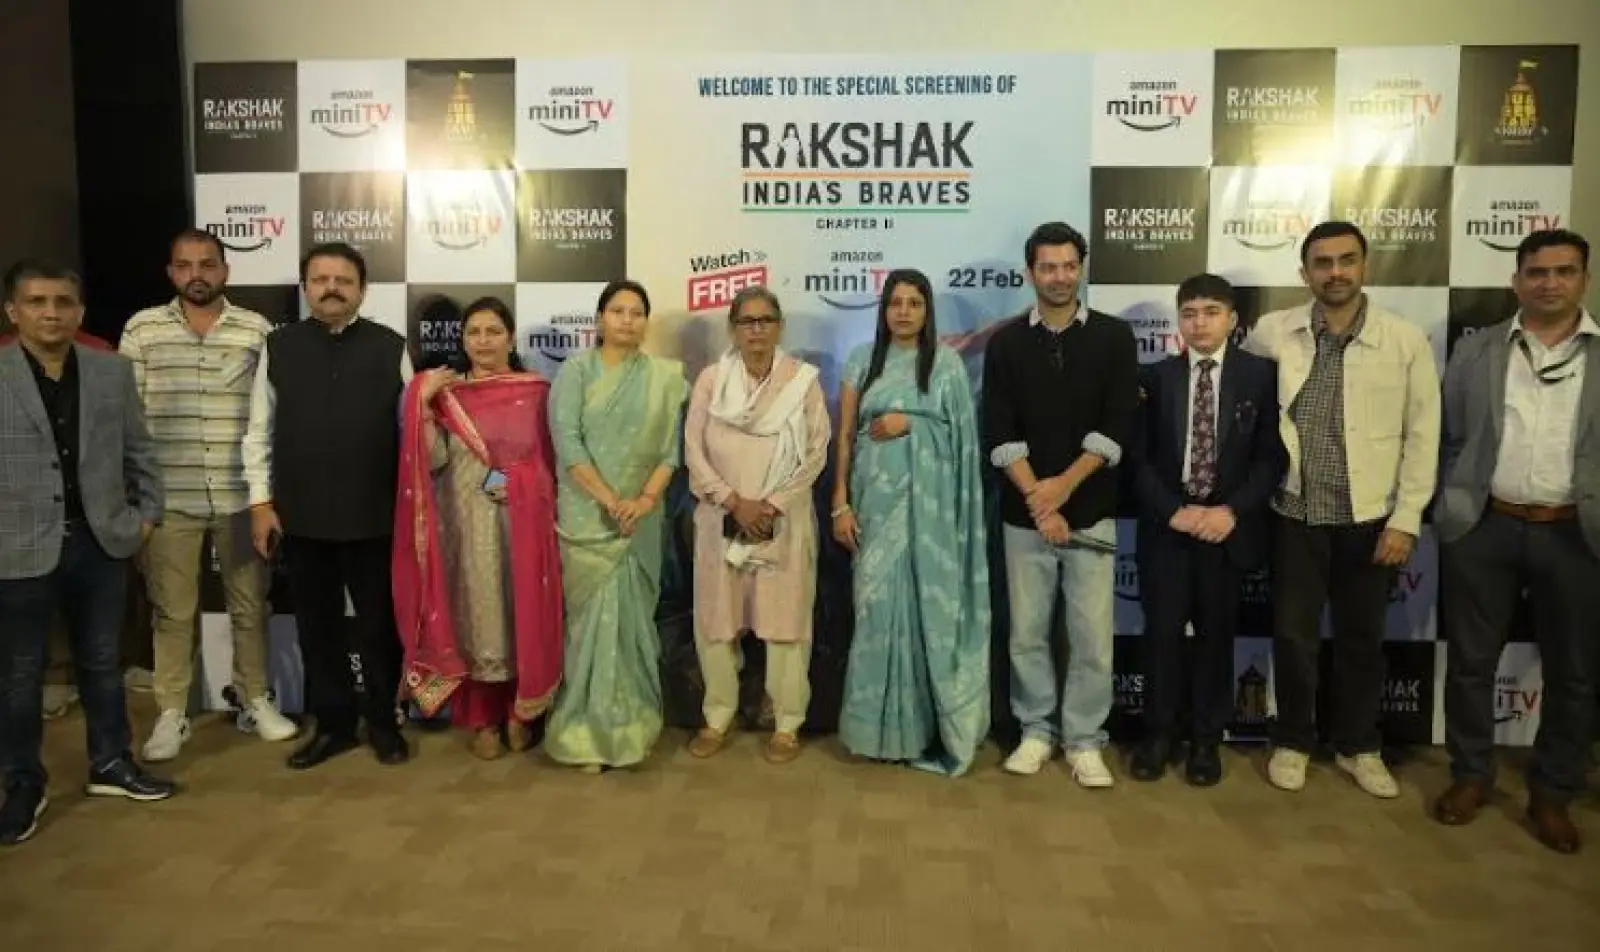 Dignitaries from the Indian Armed Forces Graced the Special Screening of Amazon miniTV's Latest Show Rakshak - India's Braves: Chapter 2 in Delhi